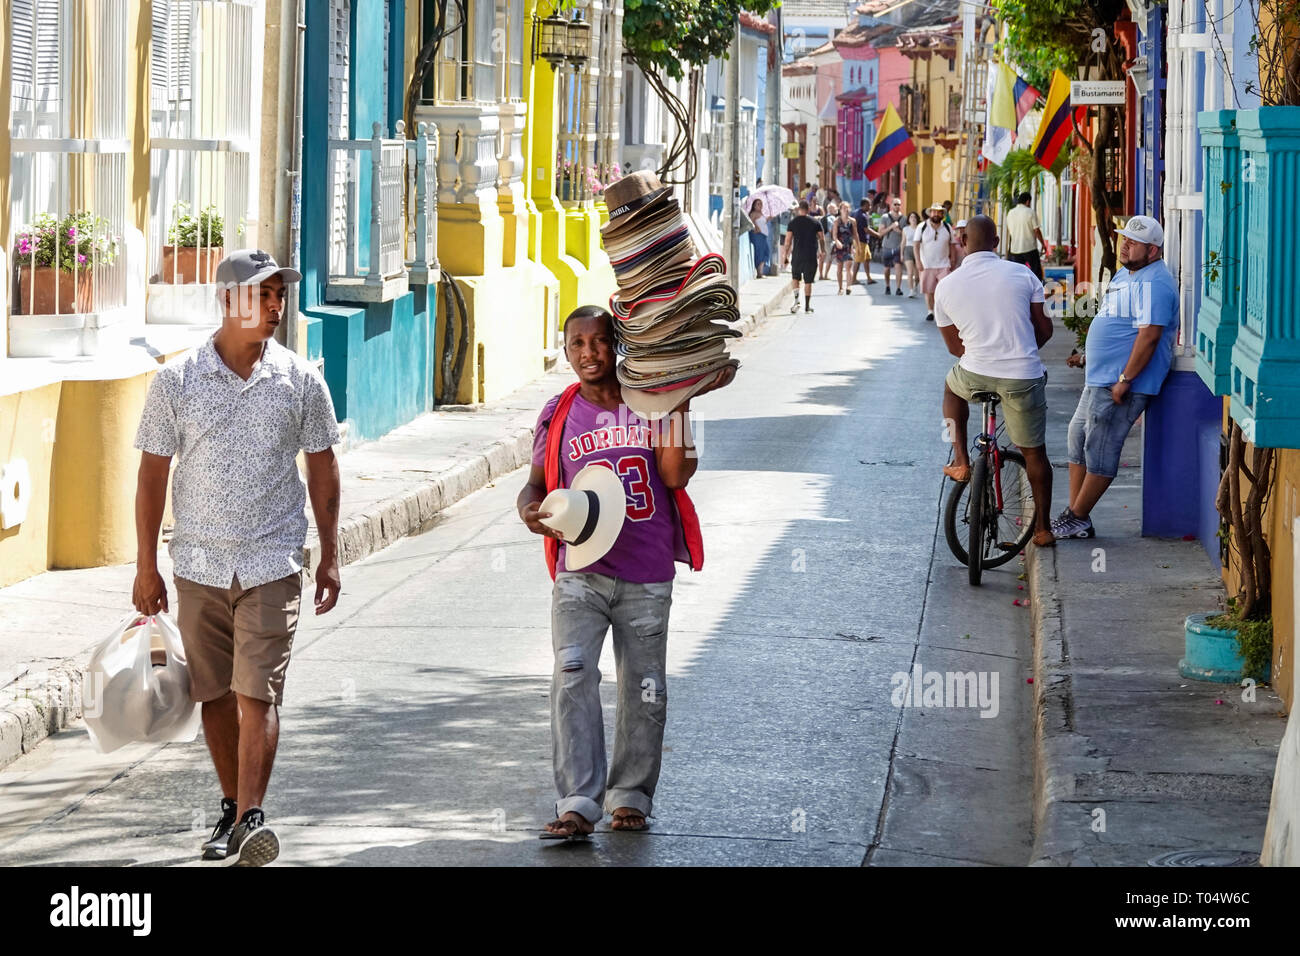 Cartagena Colombia,Center,centre,San Diego,Hispanic resident residents,man men male,colonial homes,colorful facades,hat vendor,Black Afro Caribbean,CO Stock Photo